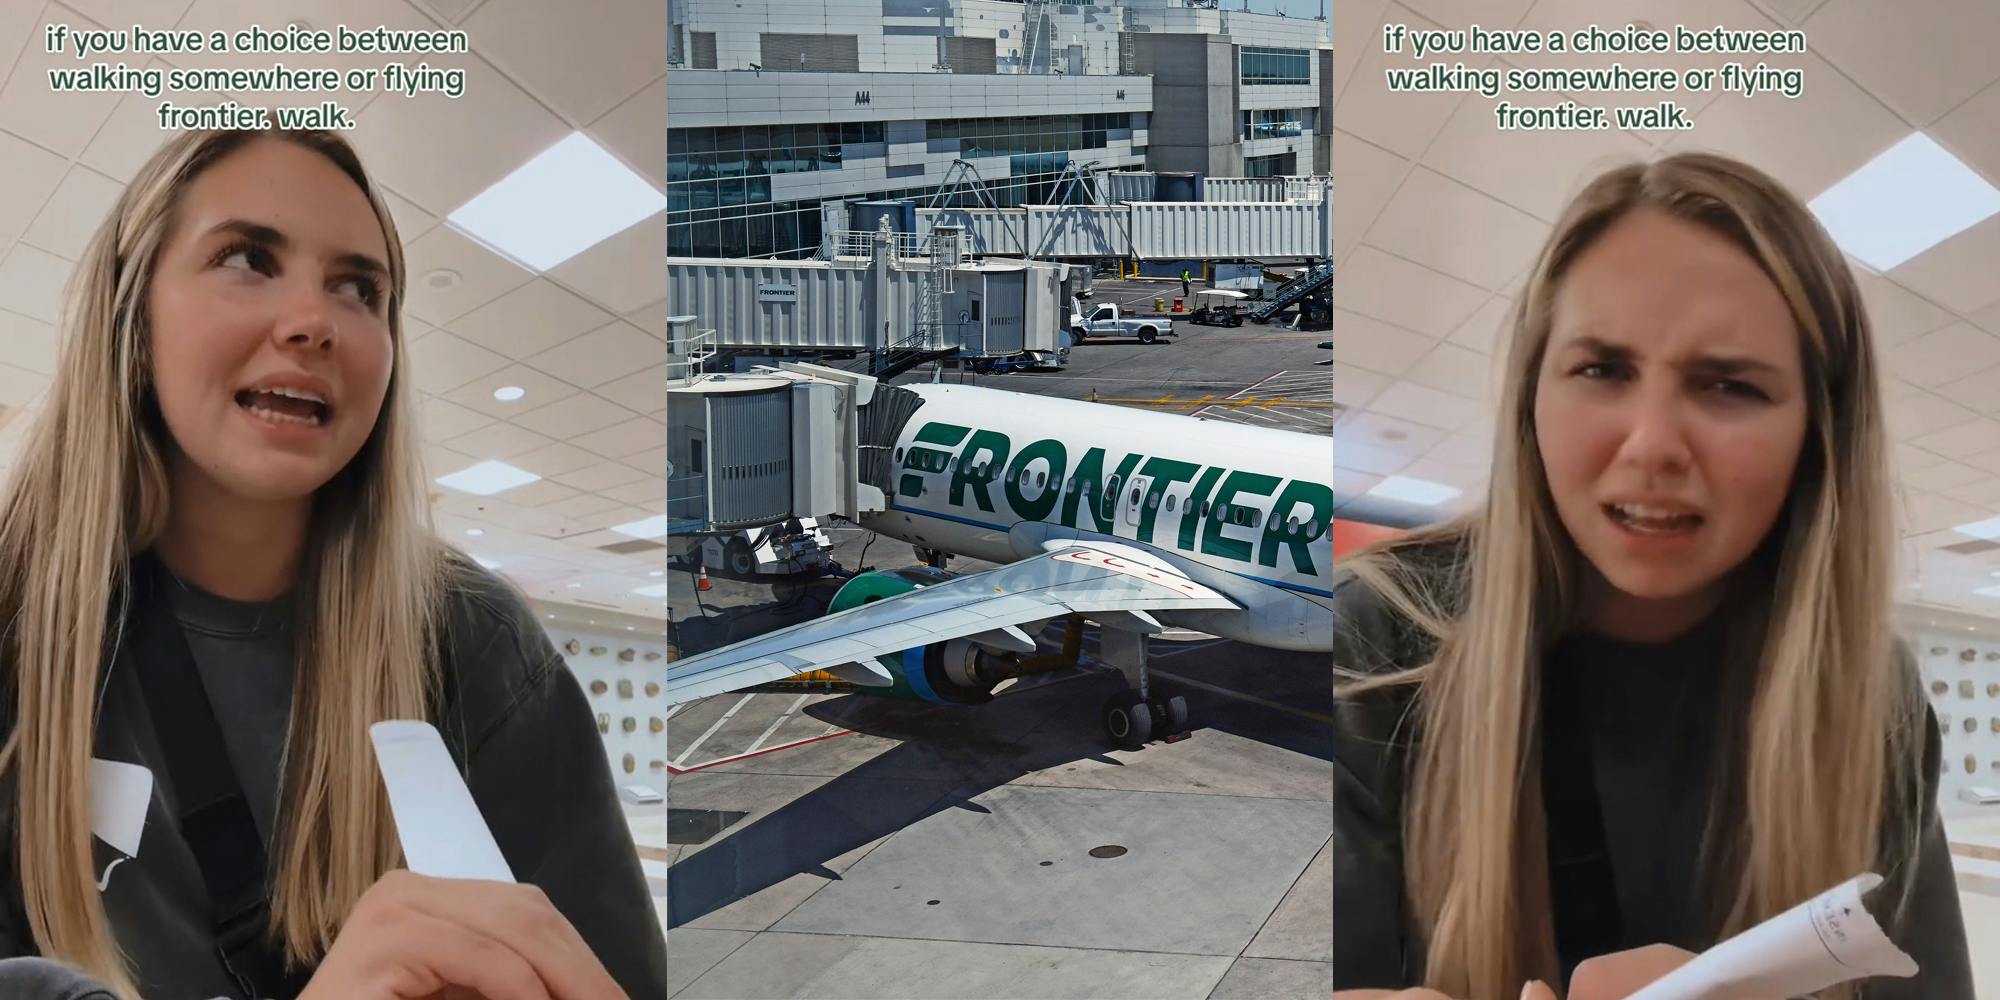 Frontier Airlines passenger speaking with boarding pass with caption "if you have a choice between walking somewhere or flying frontier, walk." (l) Frontier plane in runway (c) Frontier Airlines passenger speaking with boarding pass with caption "if you have a choice between walking somewhere or flying frontier, walk." (r)